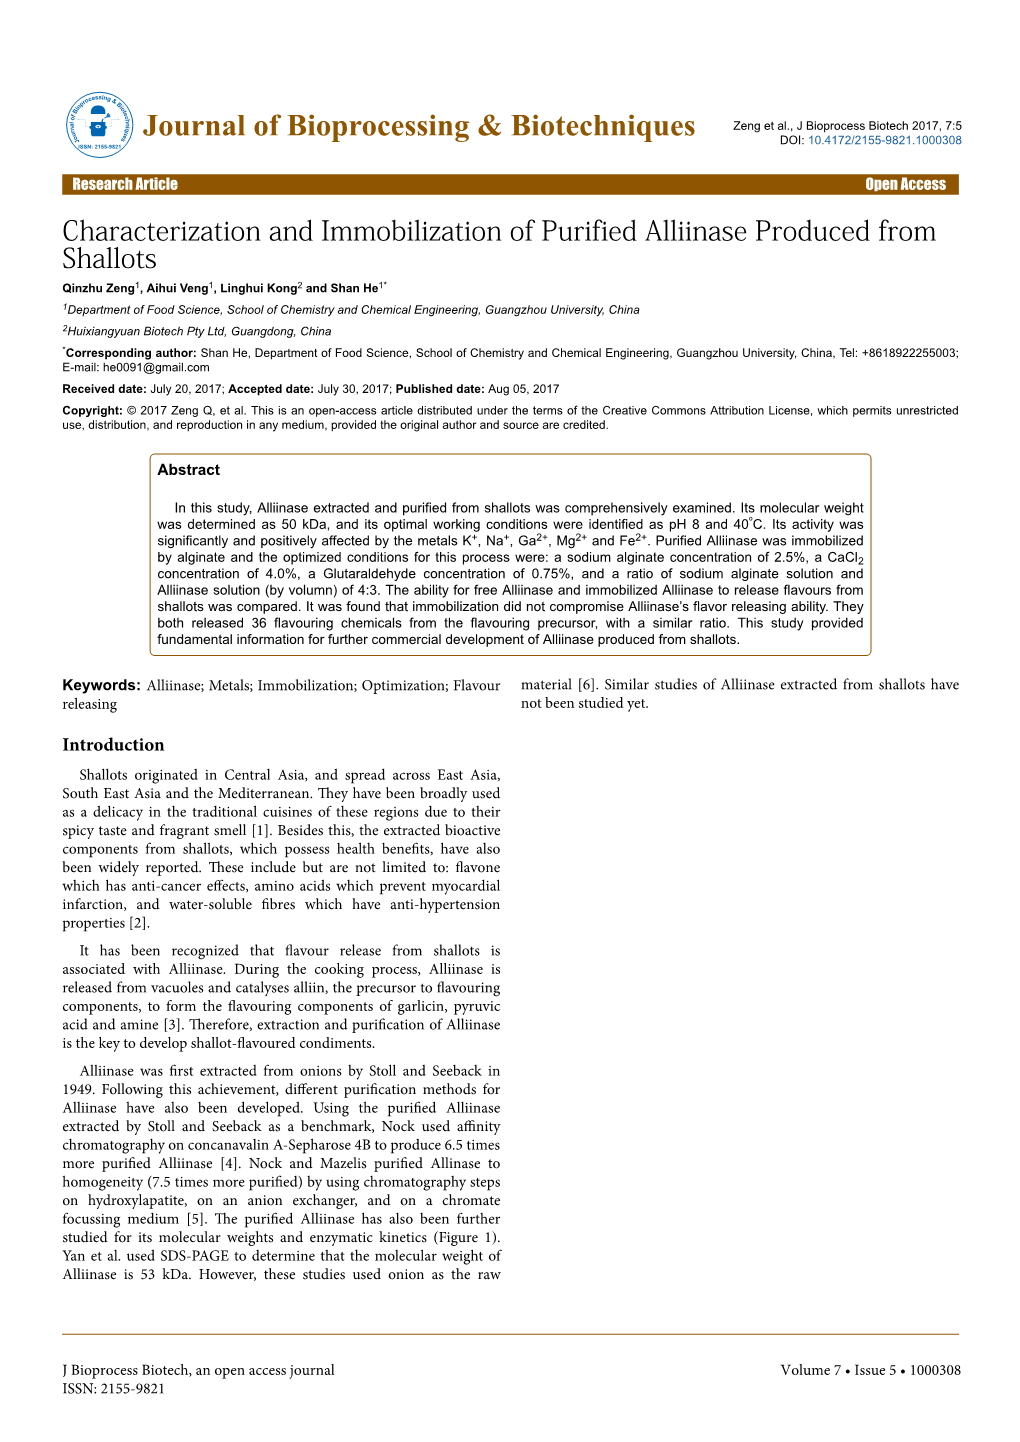 Characterization and Immobilization of Purified Alliinase Produced from Shallots